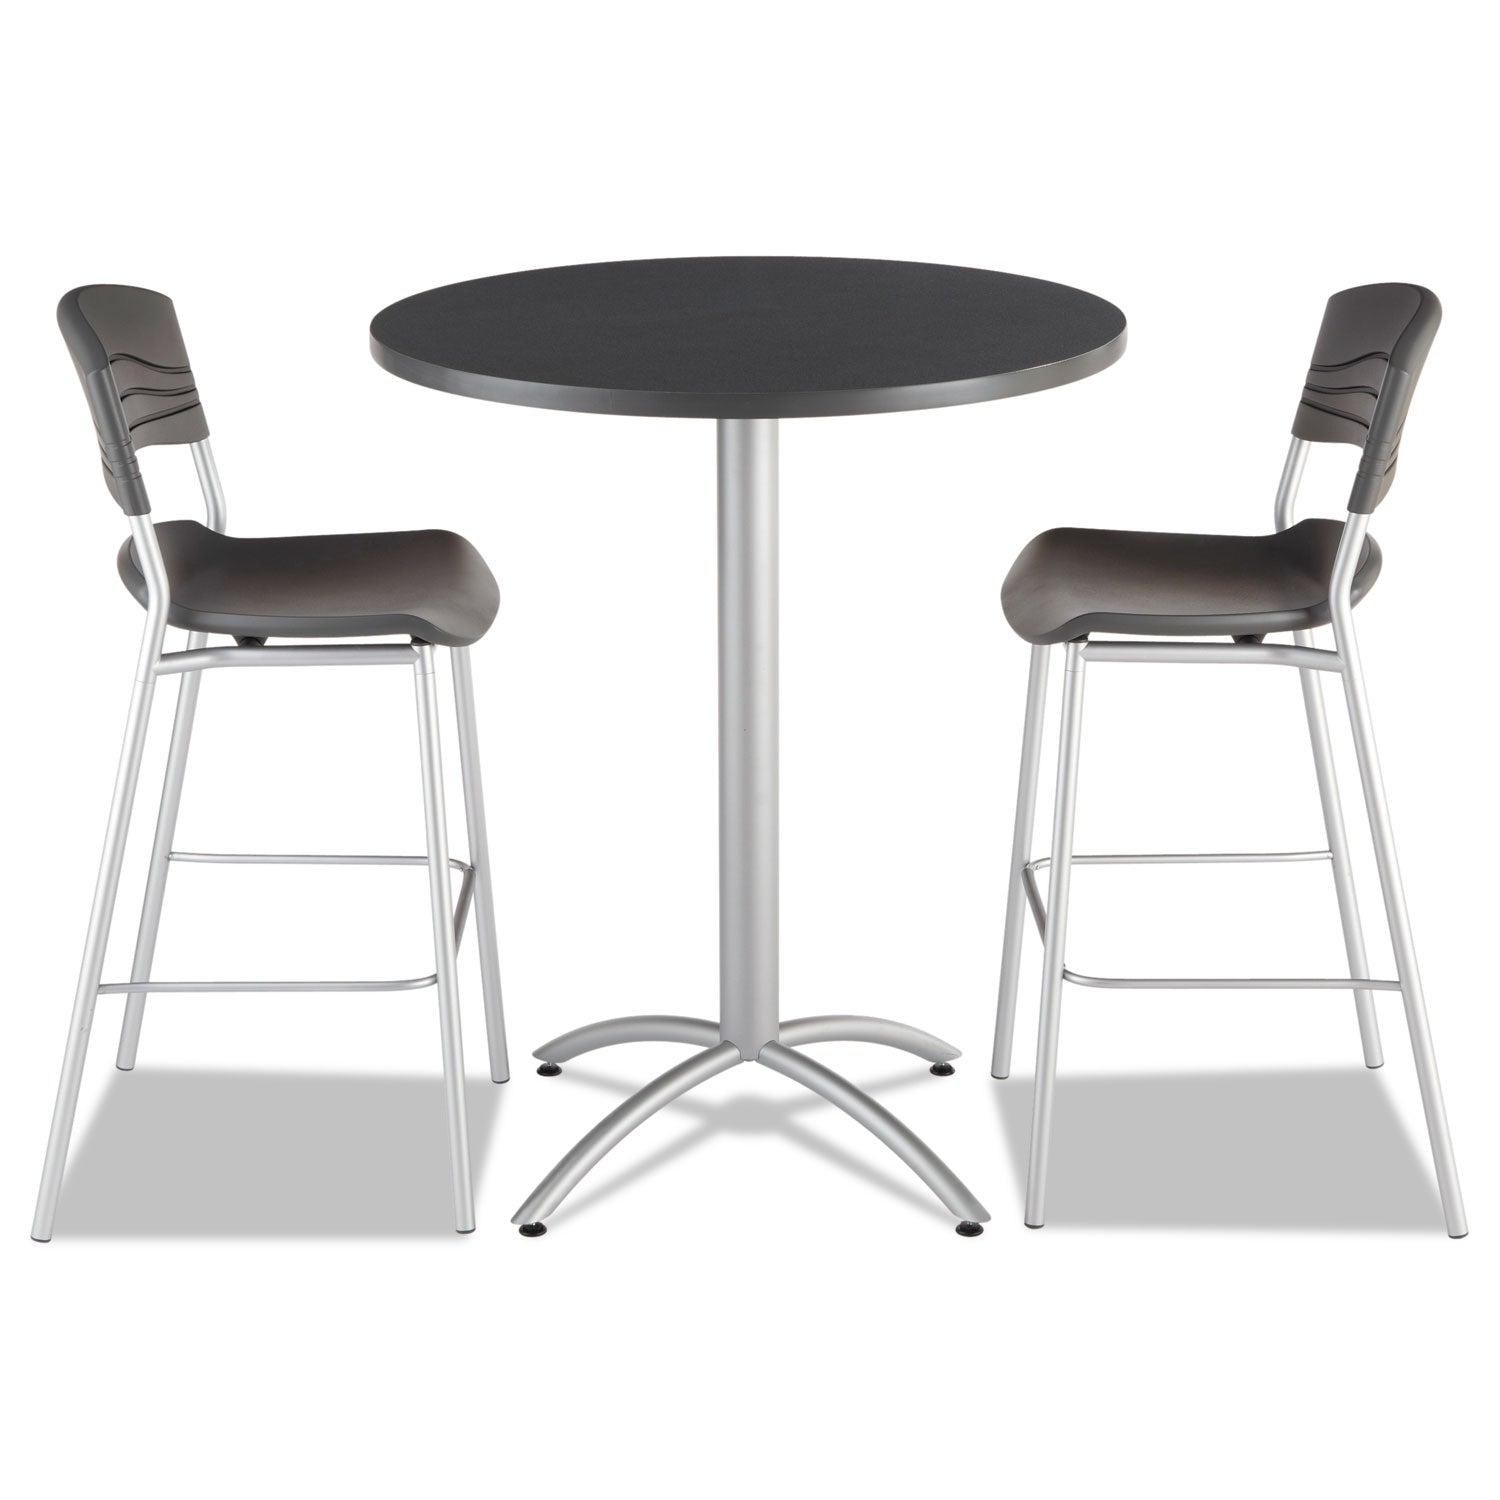 CafeWorks Table, Bistro-Height, Round, 36" x 42", Graphite Granite Top, Silver Base - 